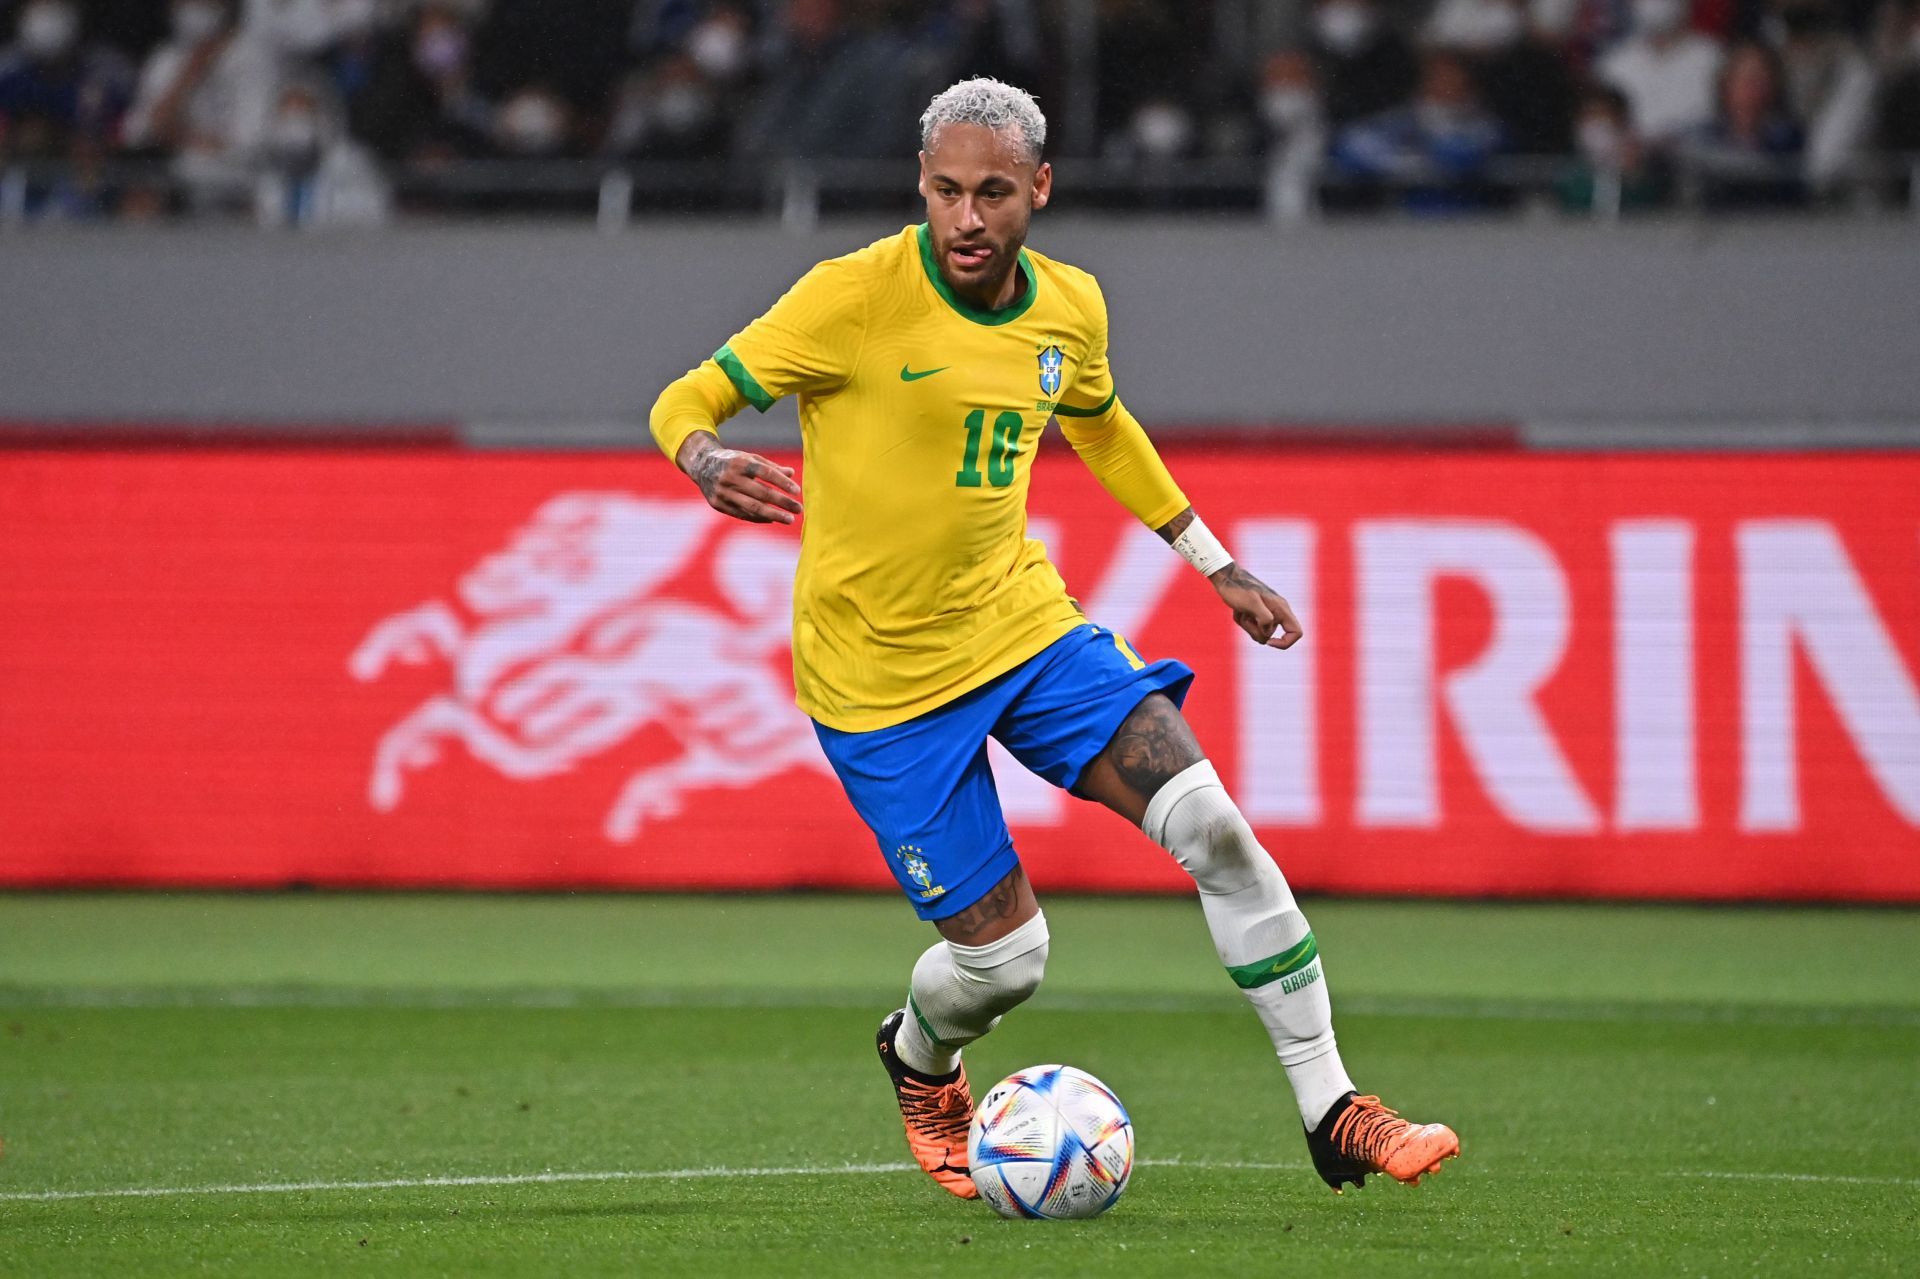 Endrick is being compared with Brazil legend Neymar